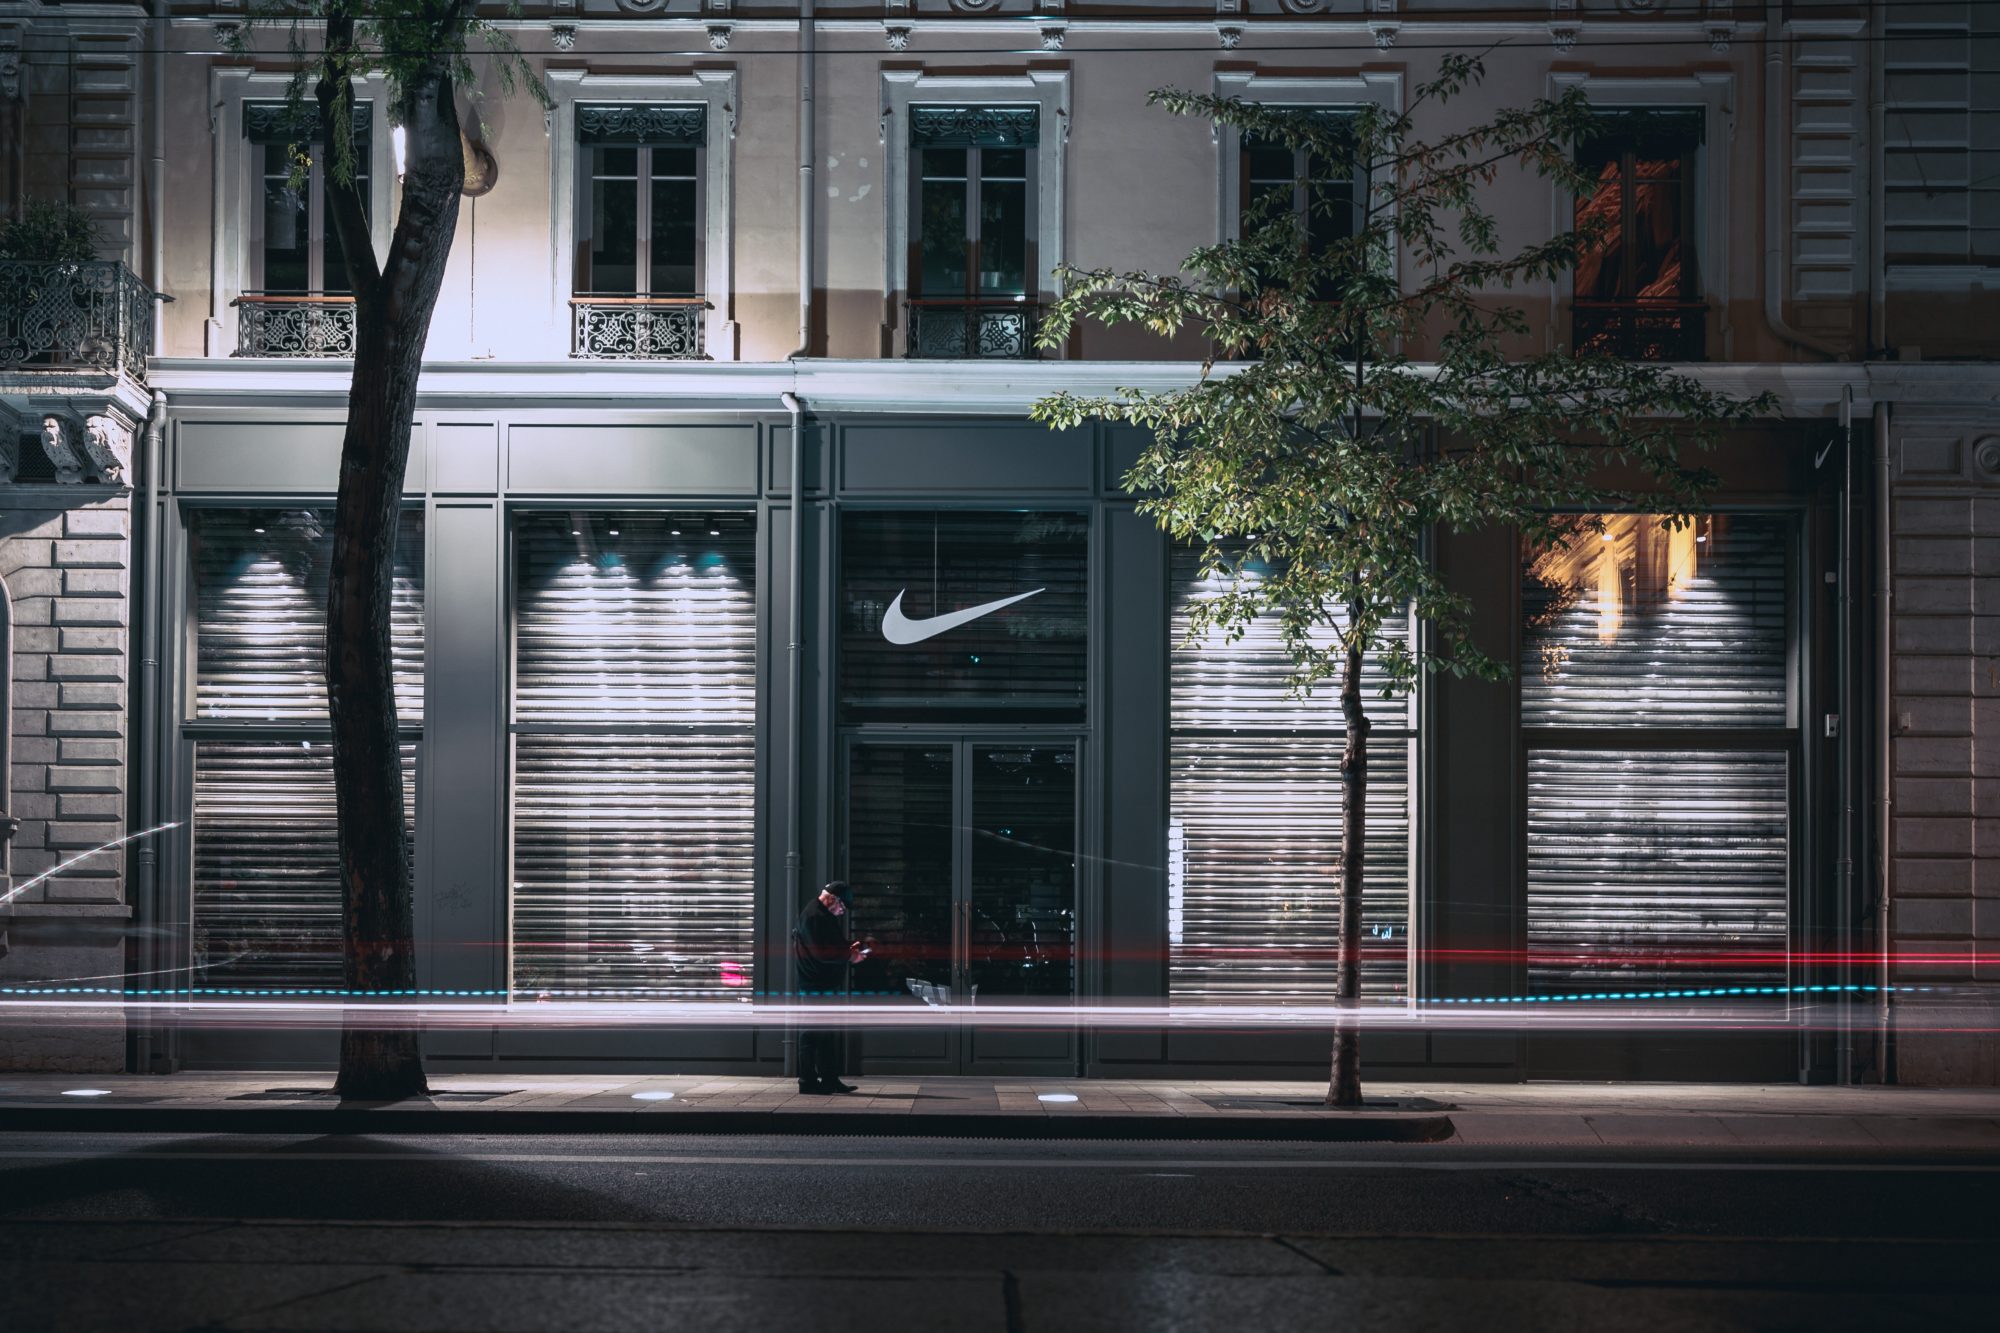 Nike Experiential Marketing – New SNKRS App Came to Life With a Giant Shoebox